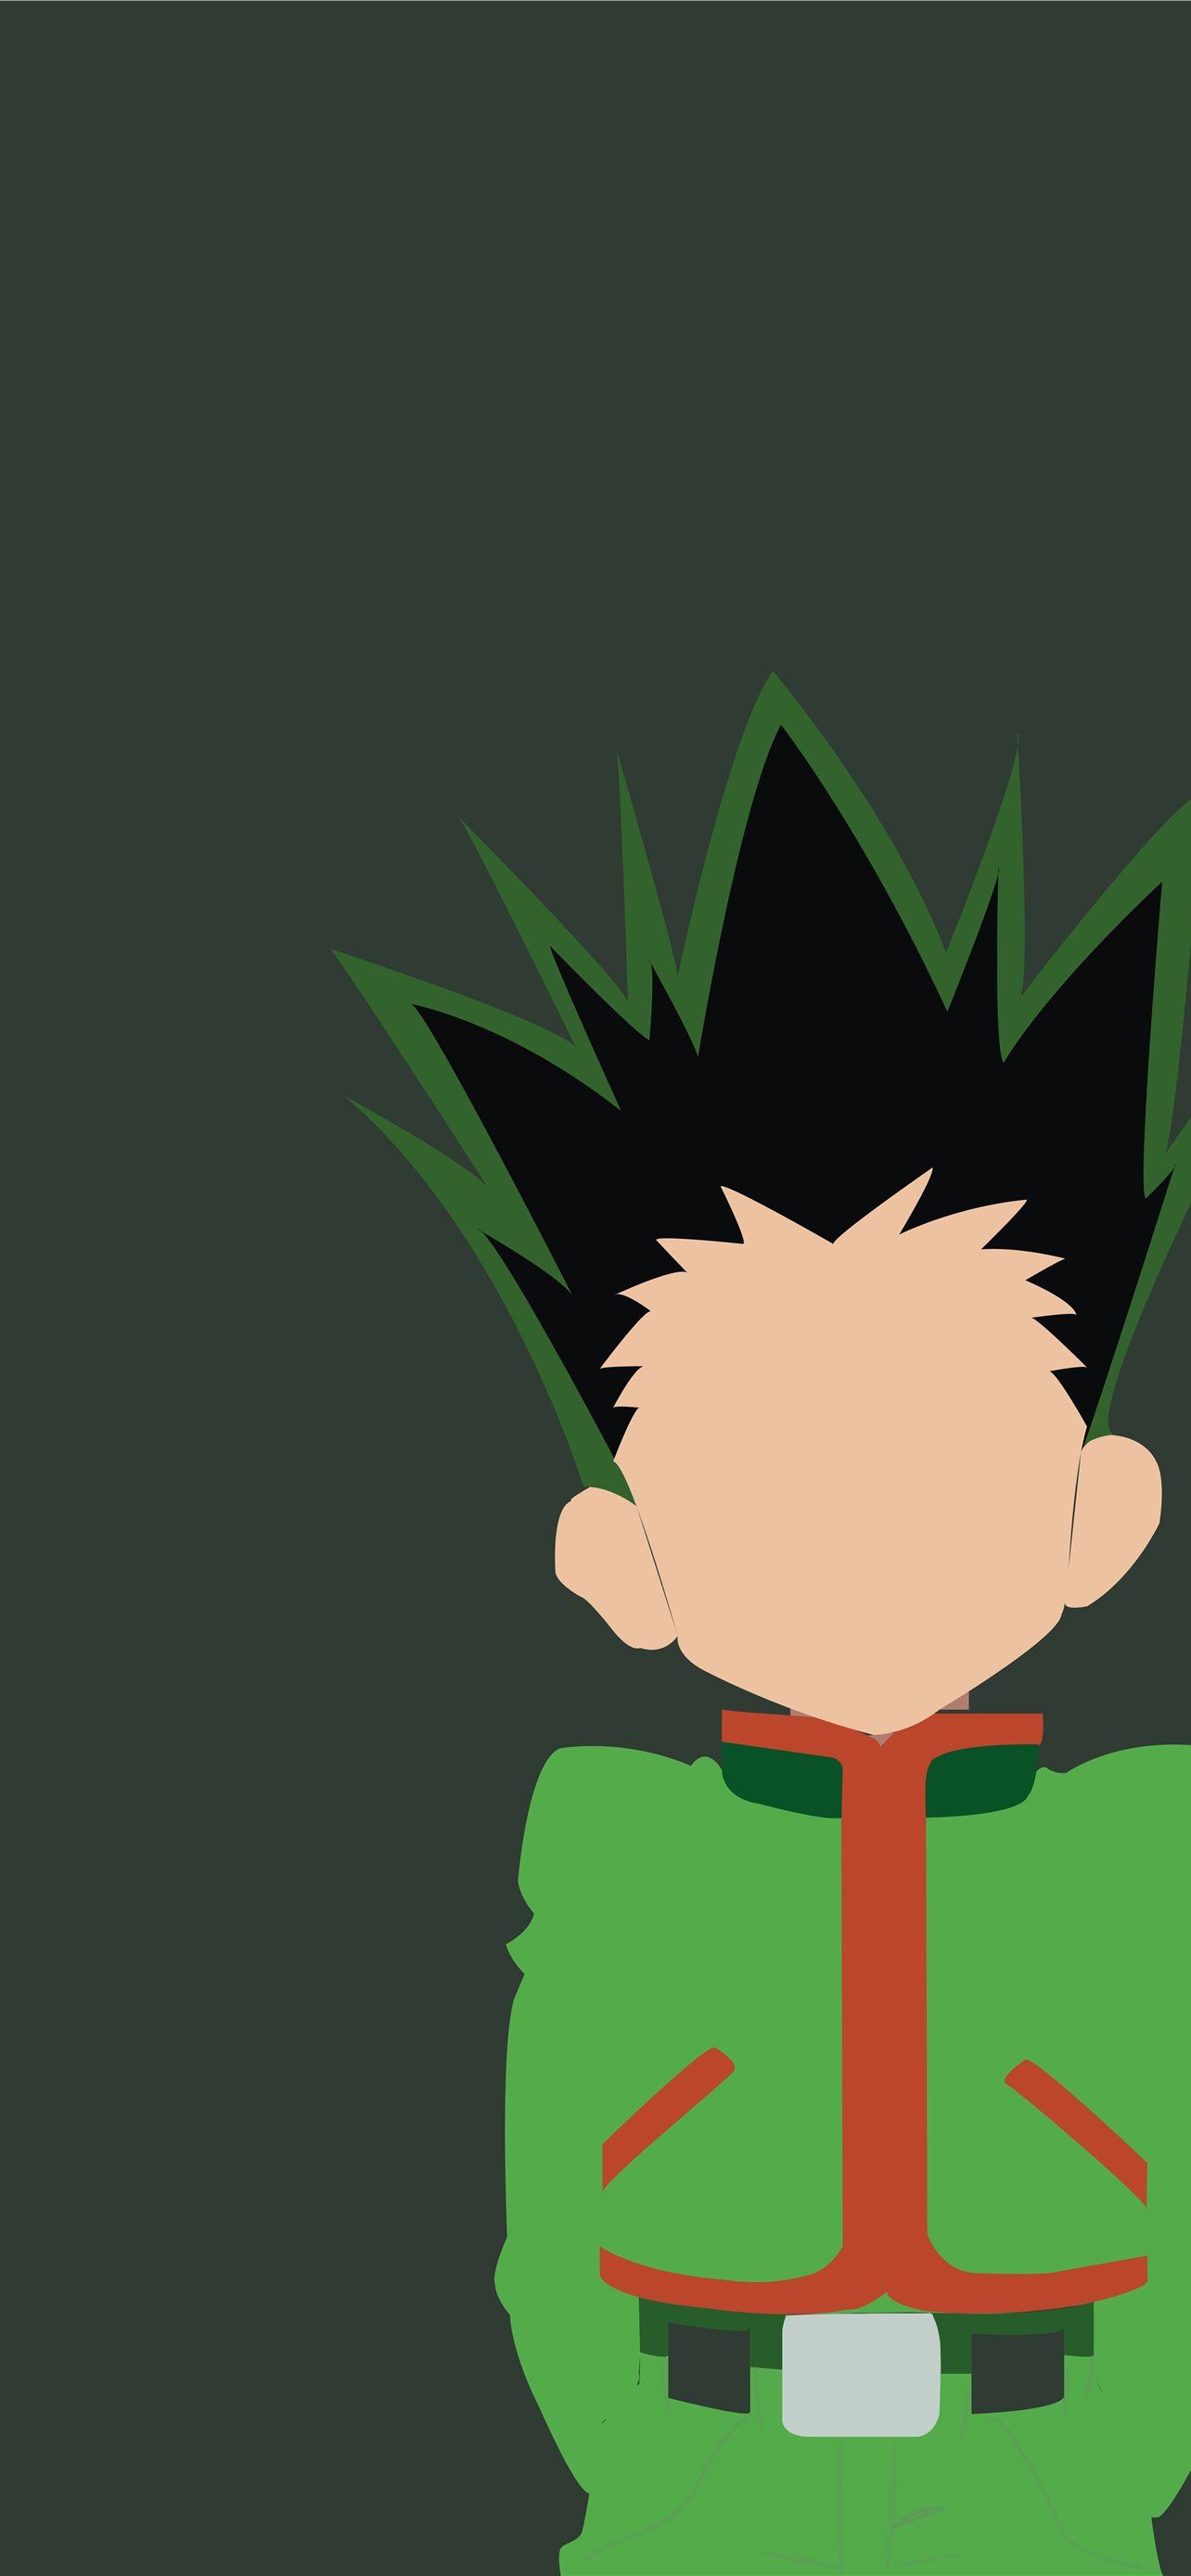 Gon Freecss Wallpapers  Top 30 Best Gon Freecss Wallpapers Download